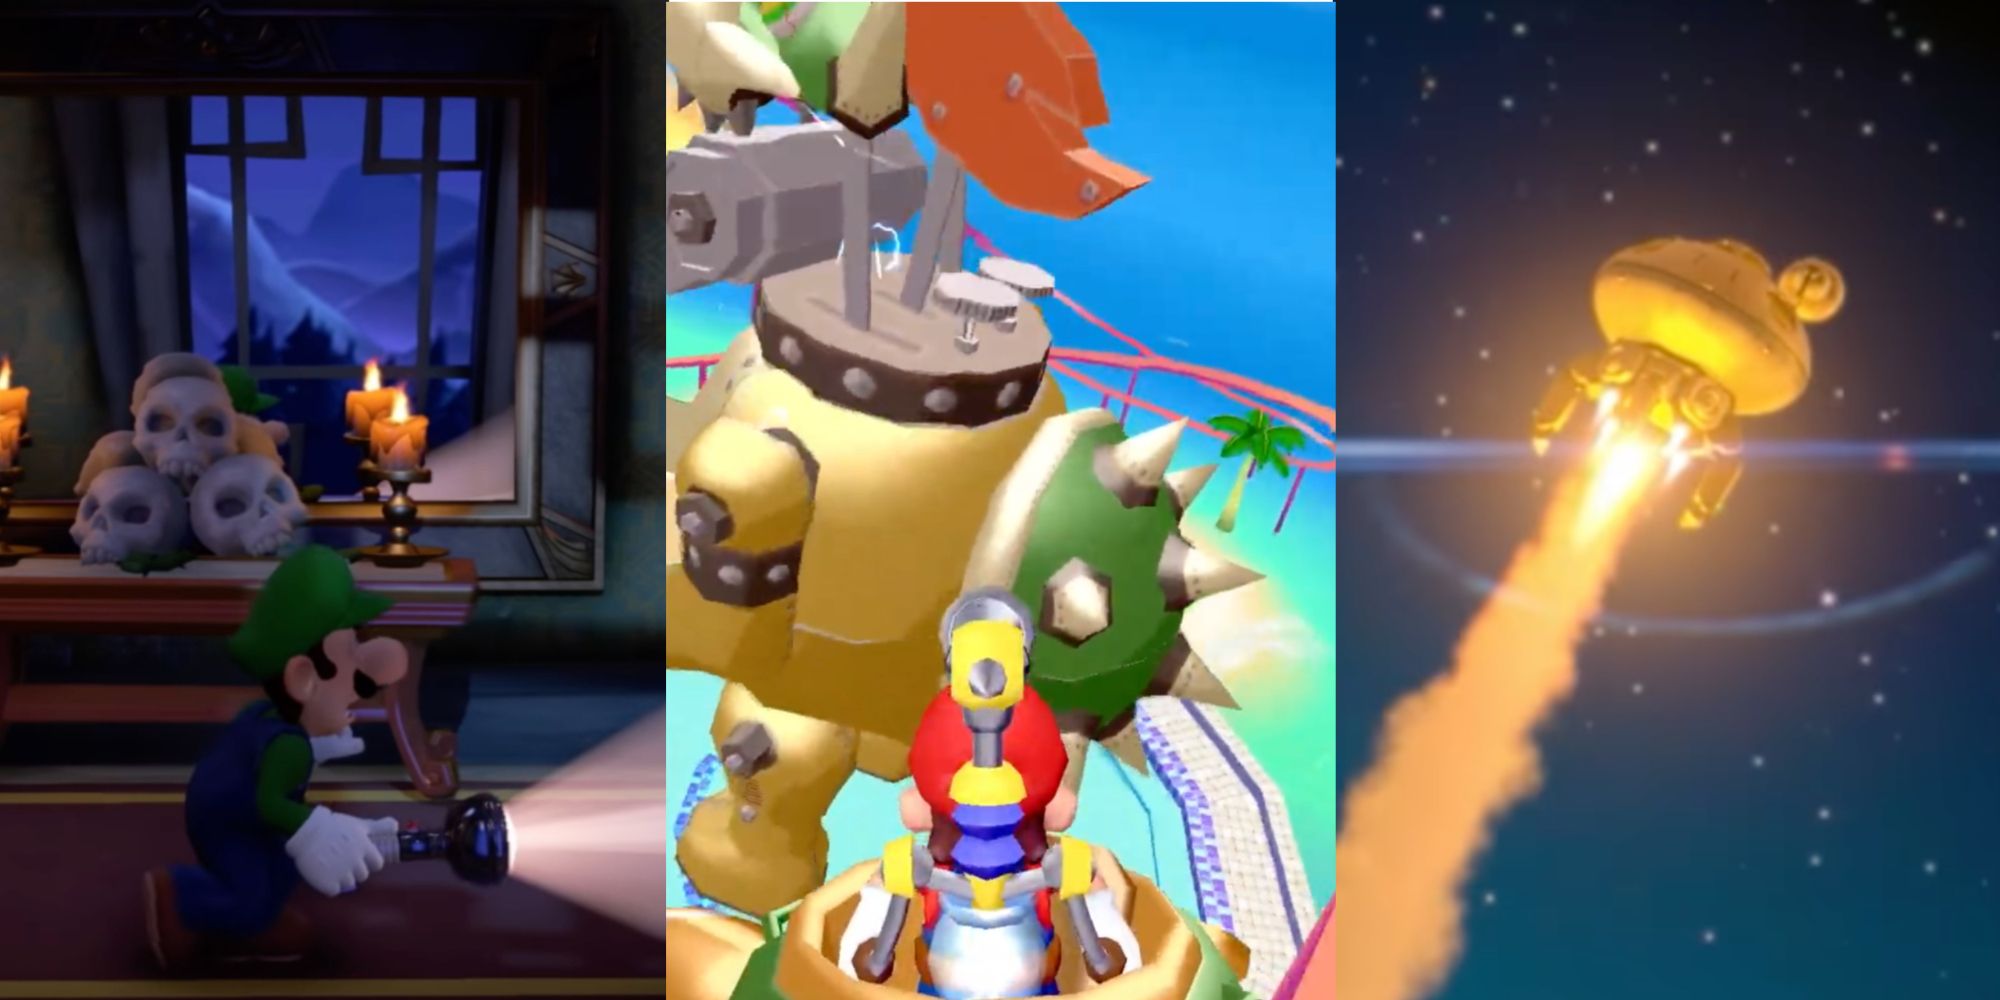 Cover Image for X Nintendo Ride Adaptations We Want To See In Super Nintendo World Featuring Luigi from Luigi's Mansion 3, Mario and FLUDD from Super Mario Sunshine, and the S.S. Drake from Pikmin 3